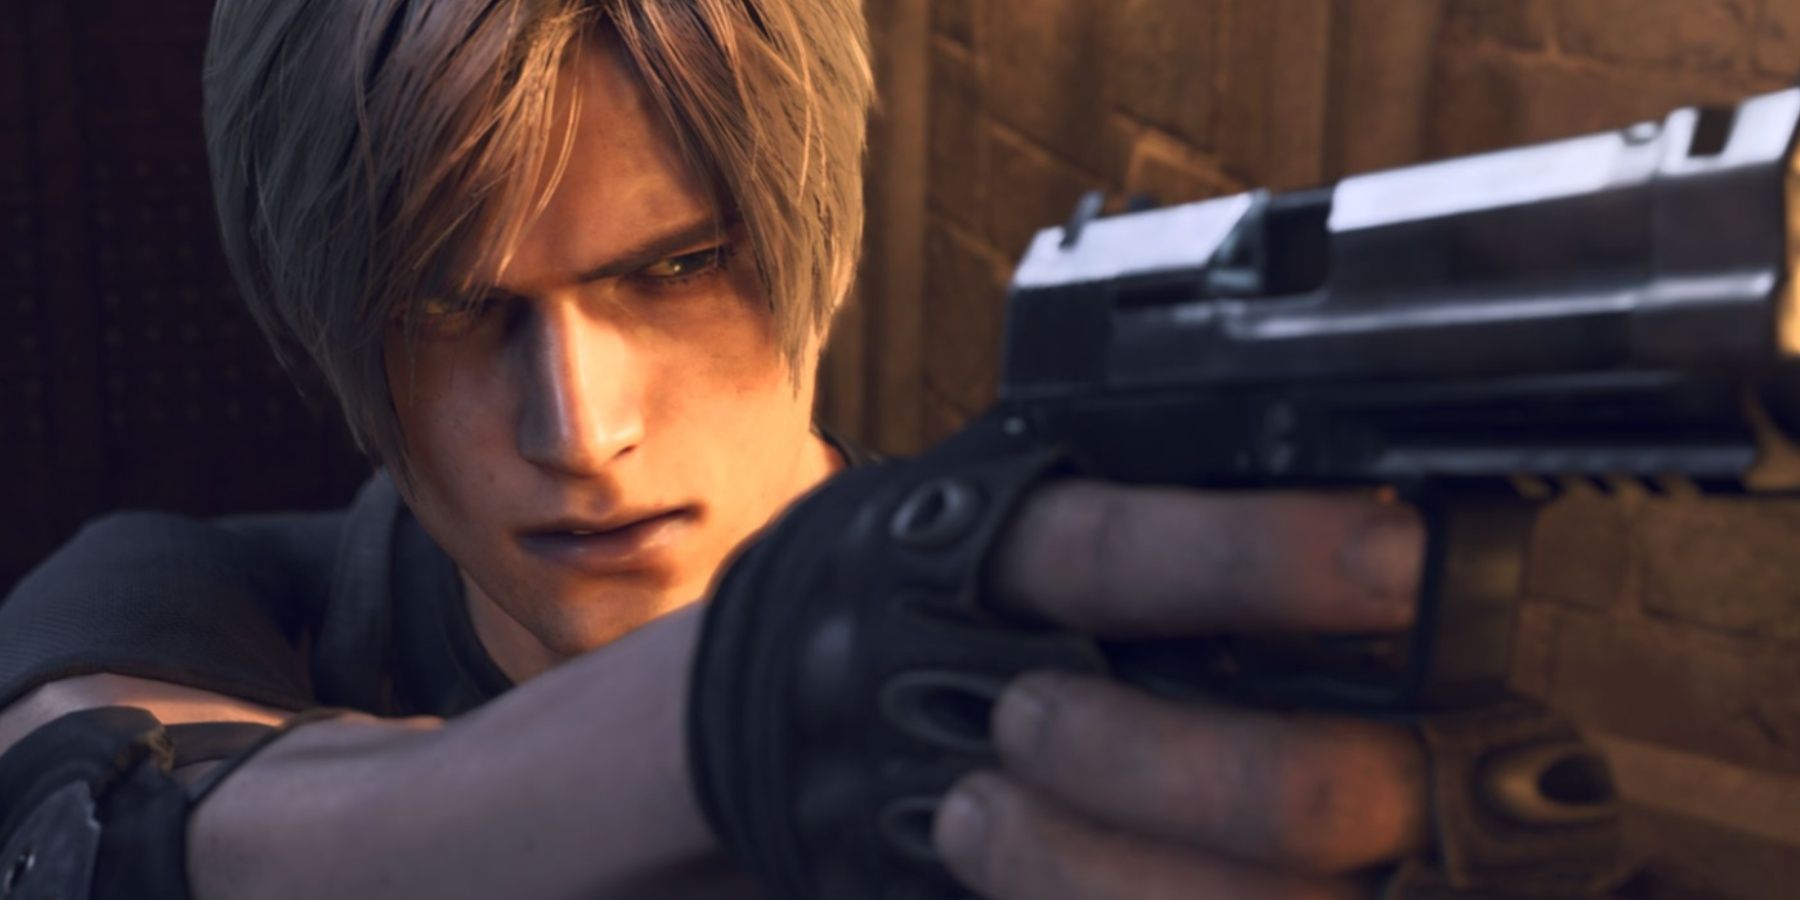 Resident Evil 4 Remake Leon S Kennedy pointing a pistol